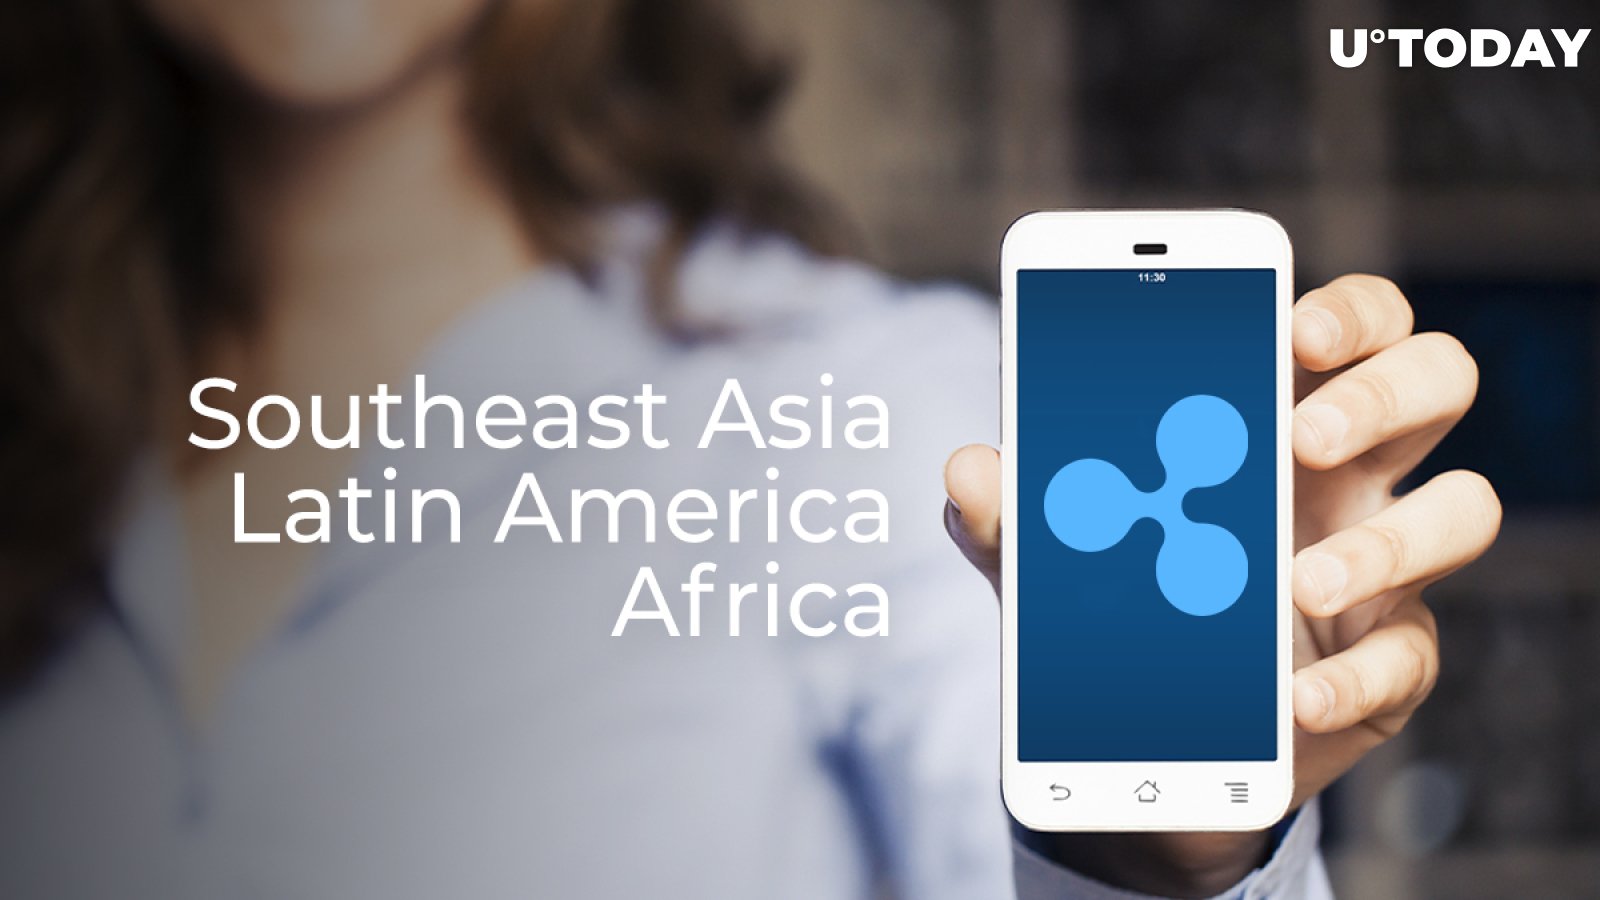 Ripple's XRP to Be Used for Cross-Border Payments in Southeast Asia, Latin America, and Africa